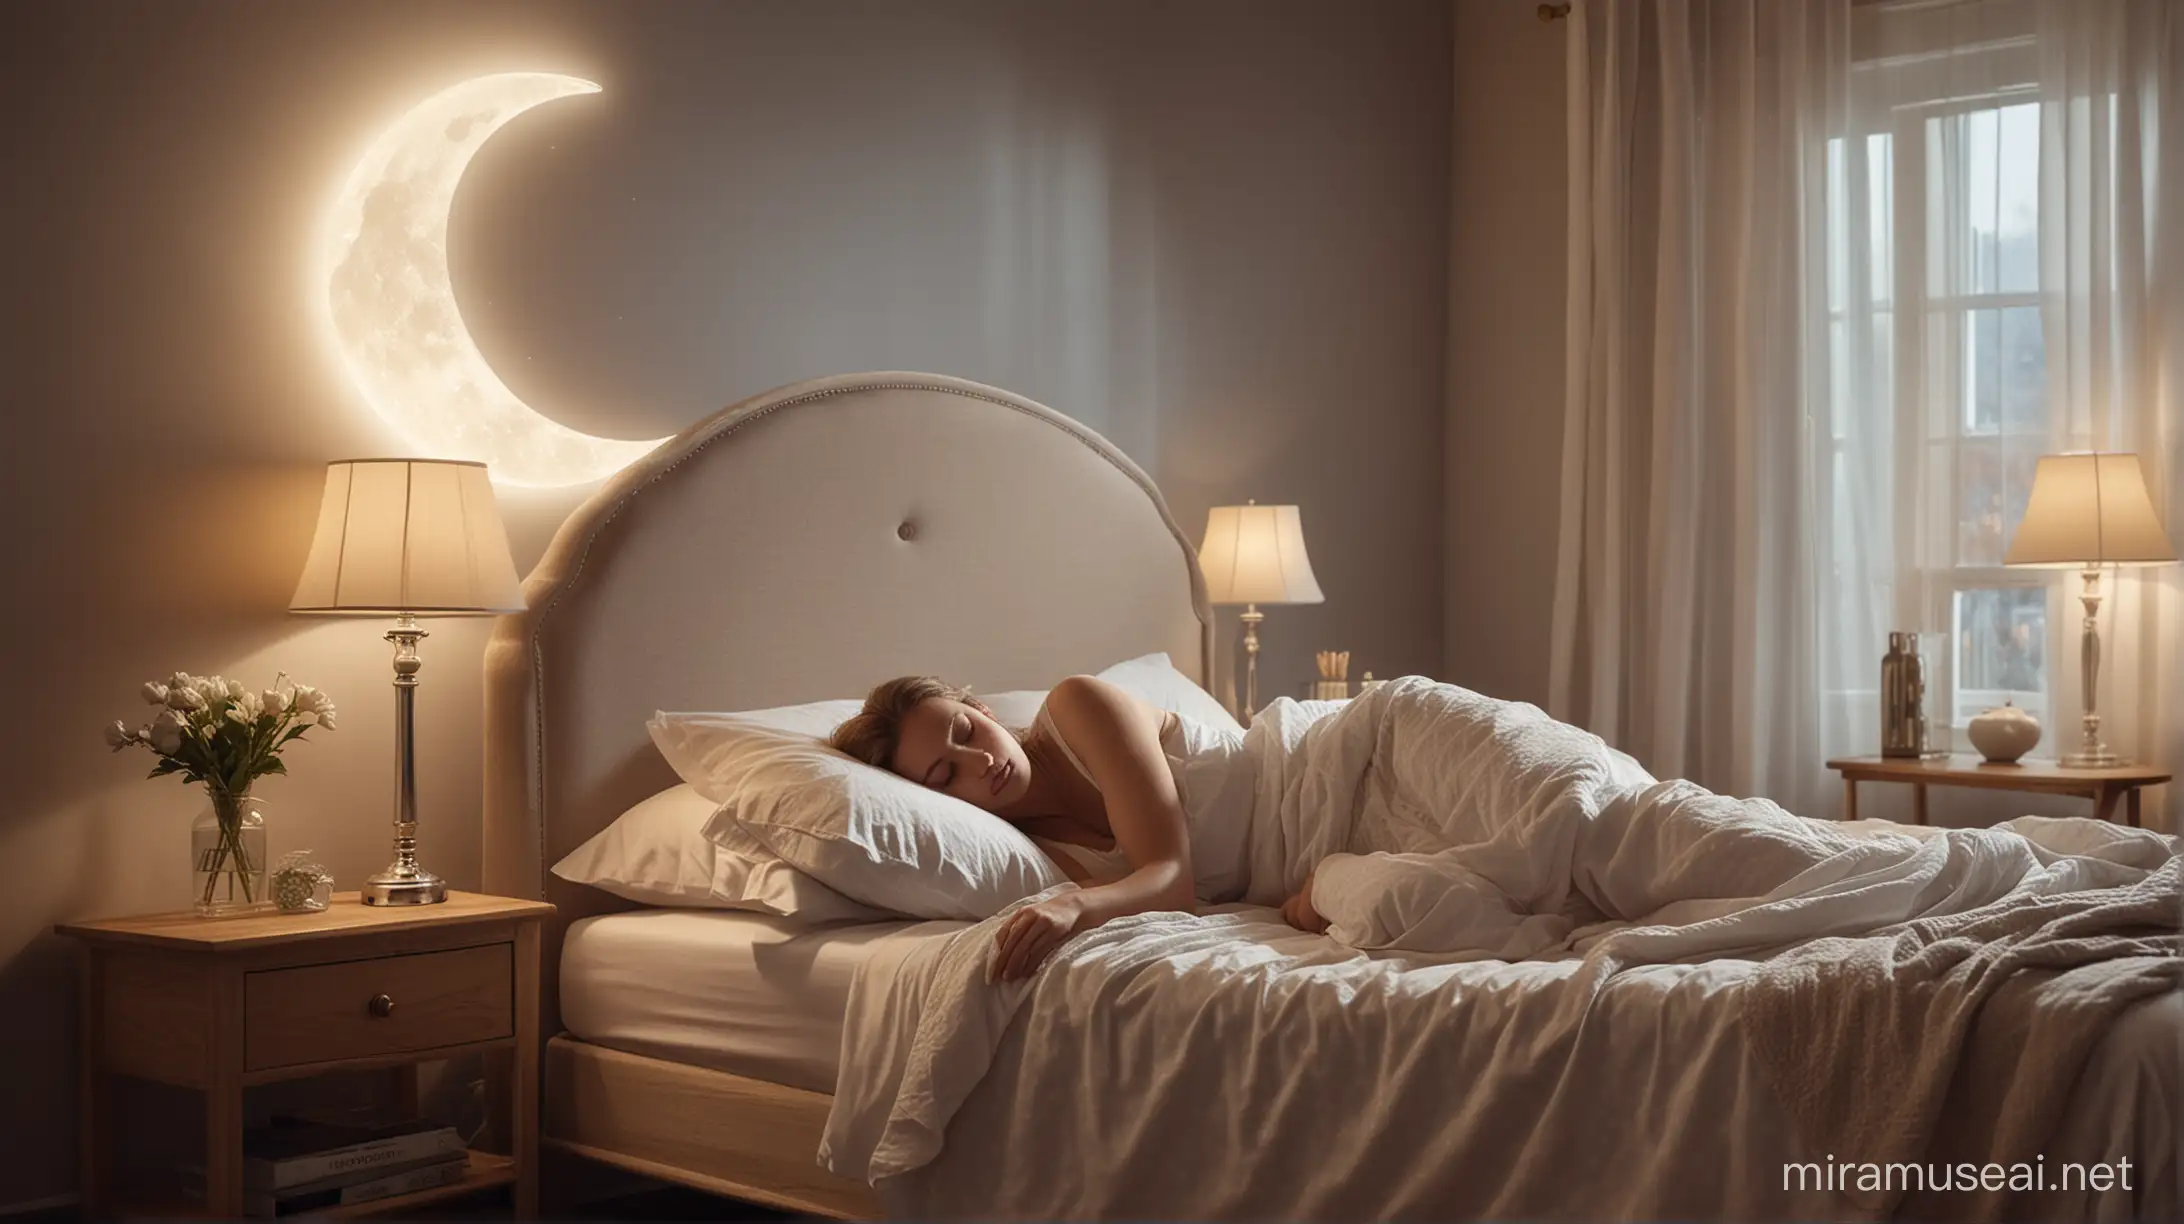 creates an image of a woman sleeping in a beautiful bedroom. she moon through the window illuminating her bed. diffuse lighting. little lighting. lamp on.